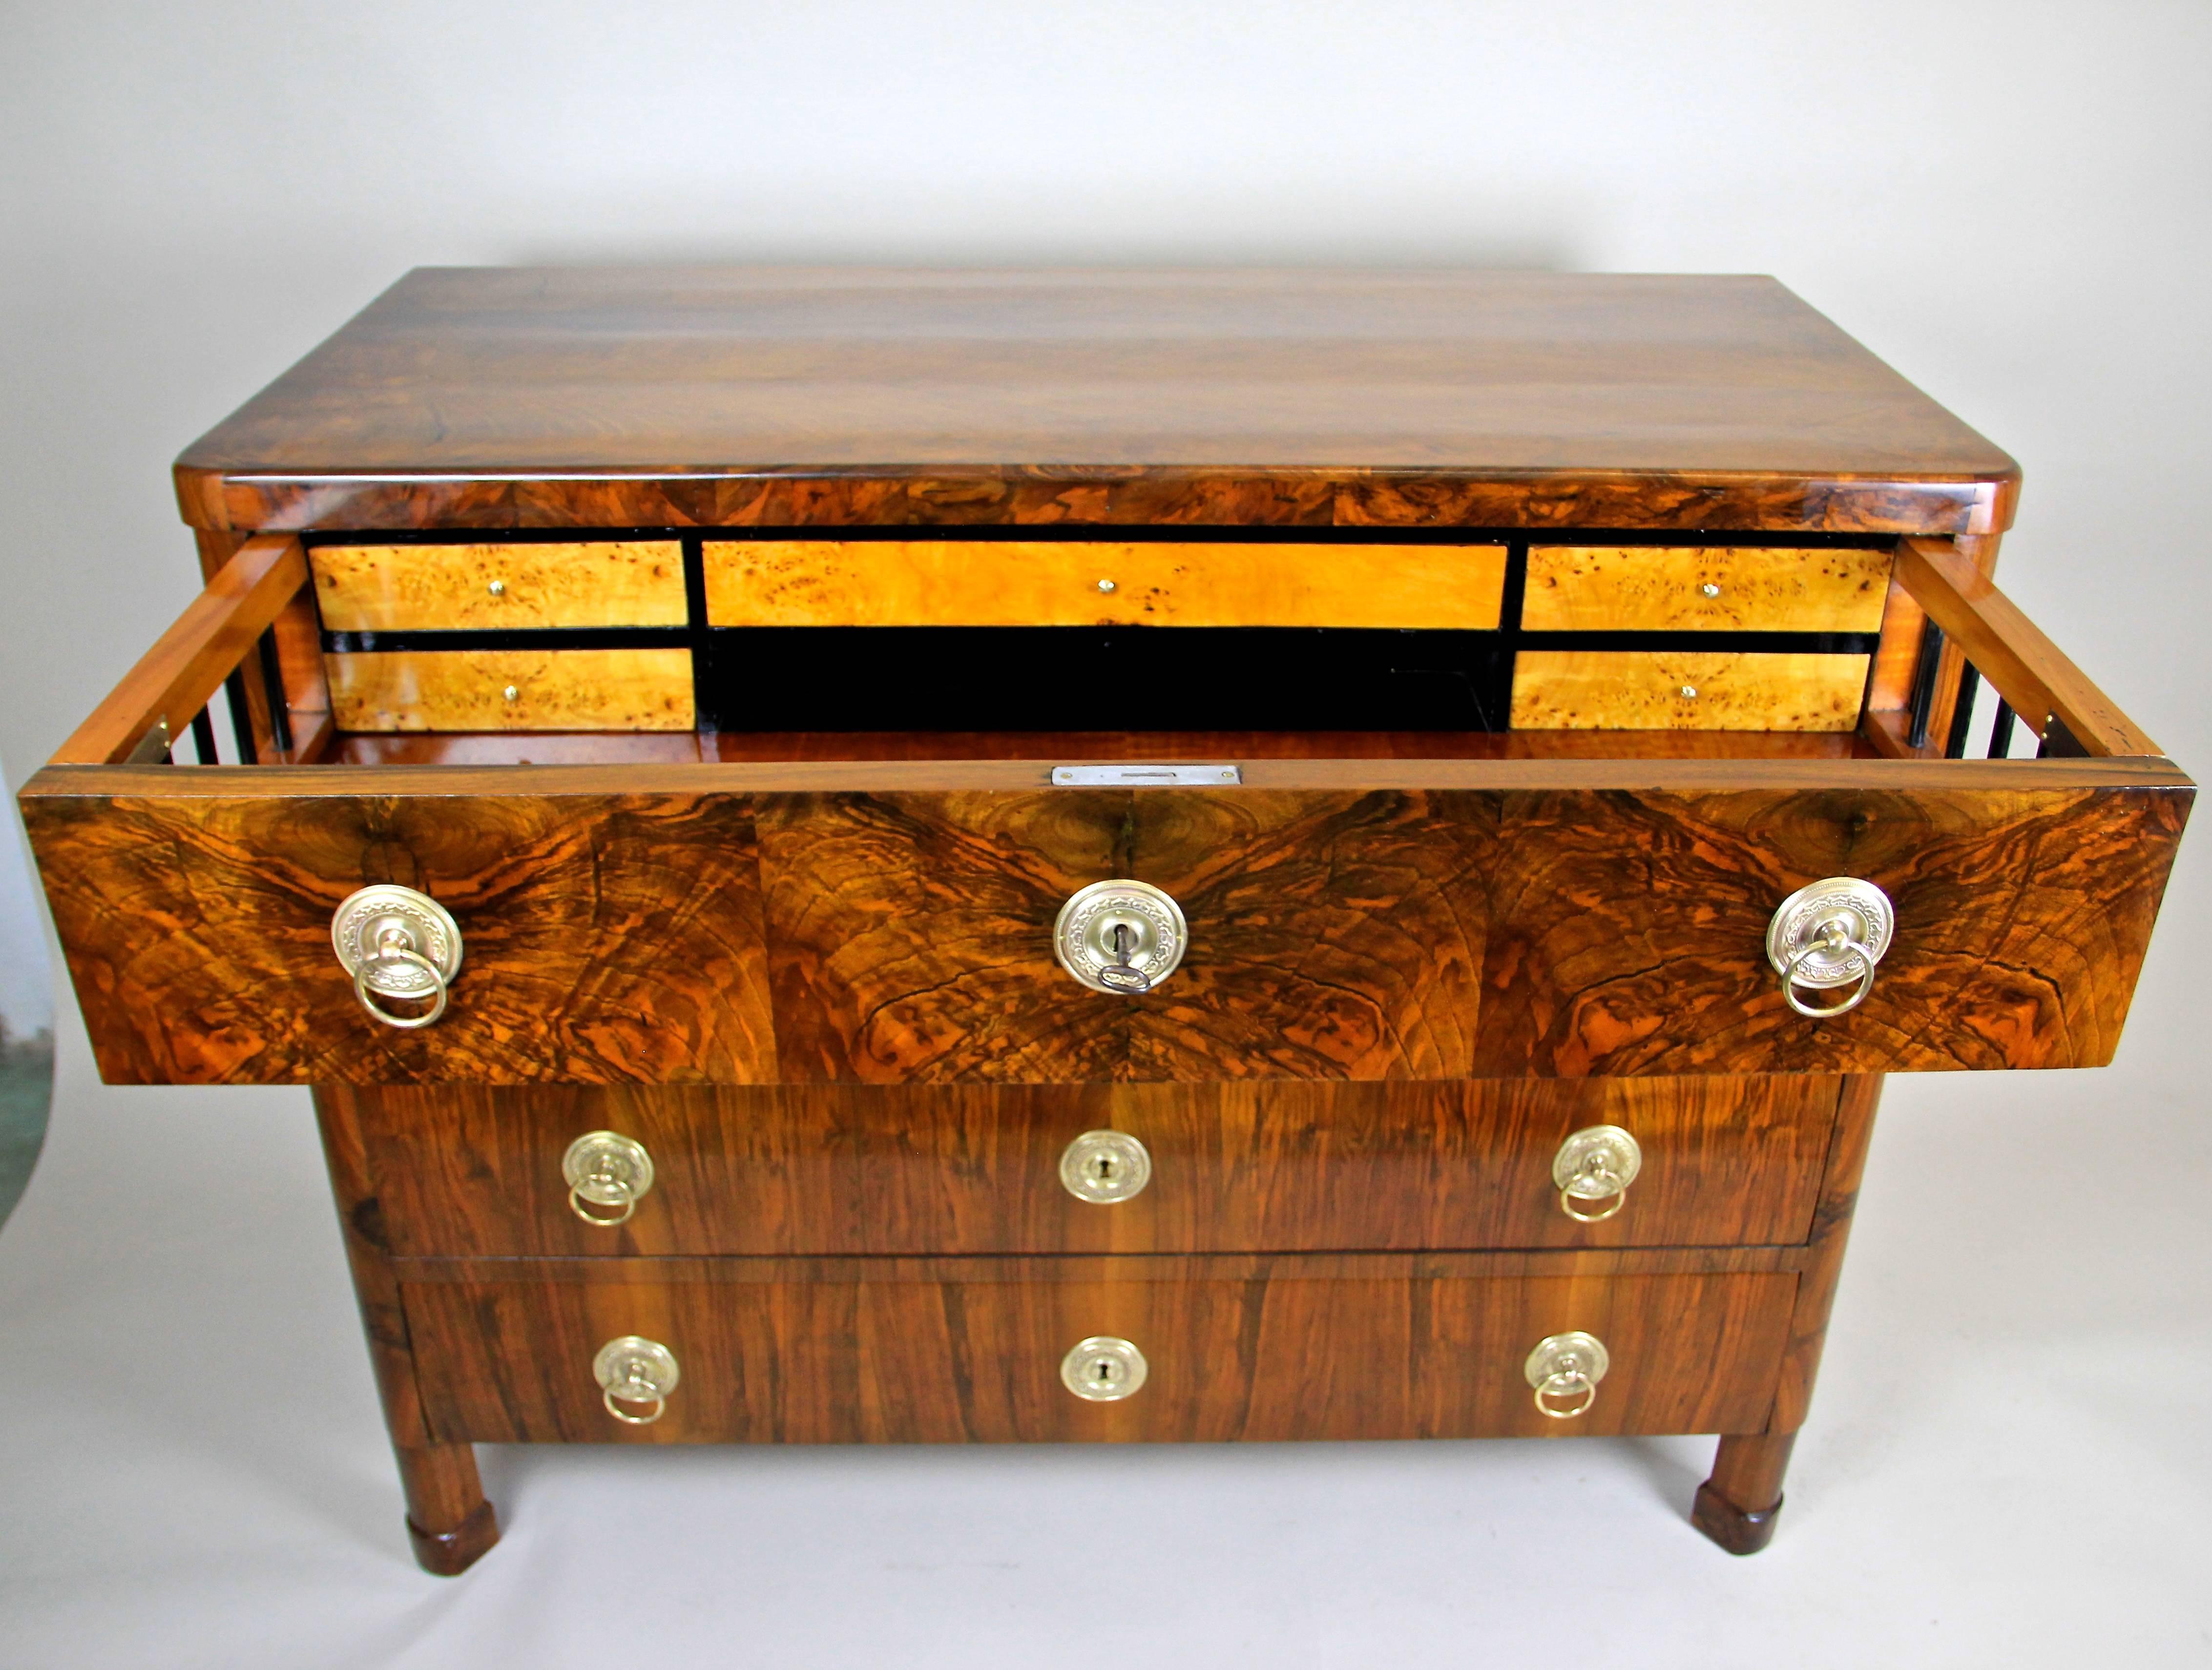 Outstanding Austrian Biedermeier chest of drawers/ writing commode in fine nut wood from circa 1830. Impressing with an absolute fantastic grain, this completely restored four drawer commode is a real transformer. Three big drawers provide a lot of